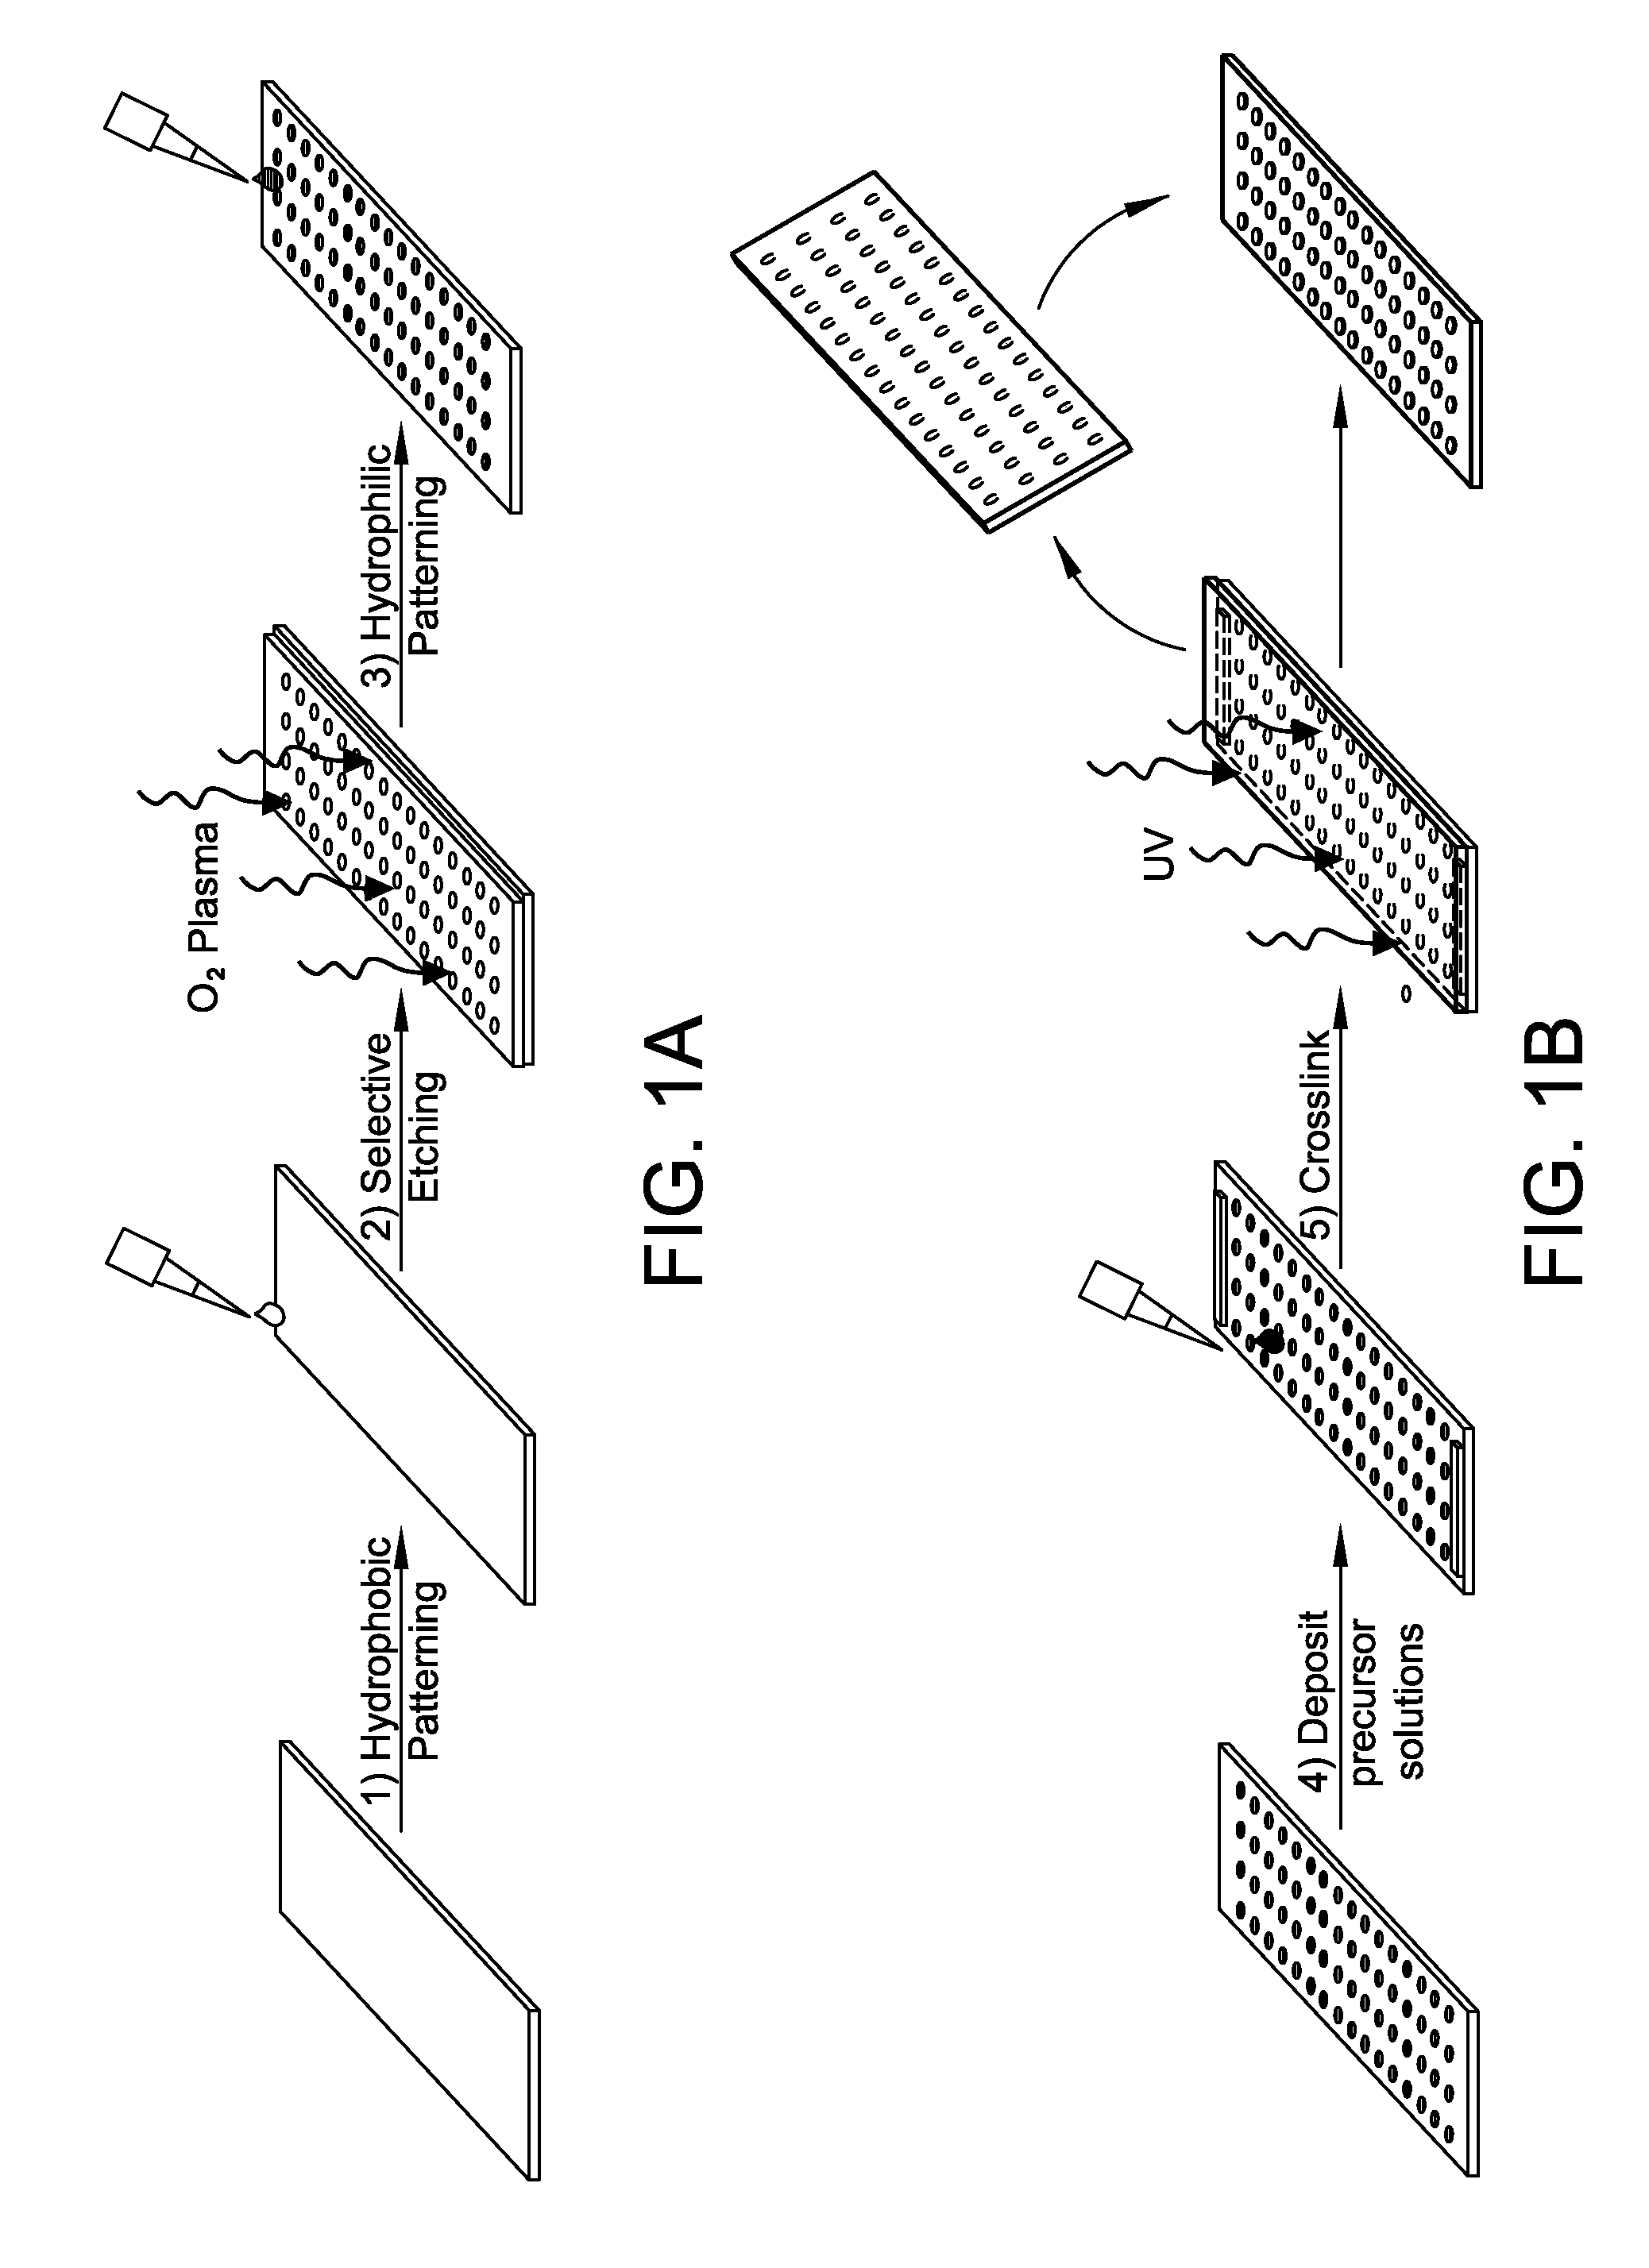 Novel method for forming hydrogel arrays using surfaces with differential wettability